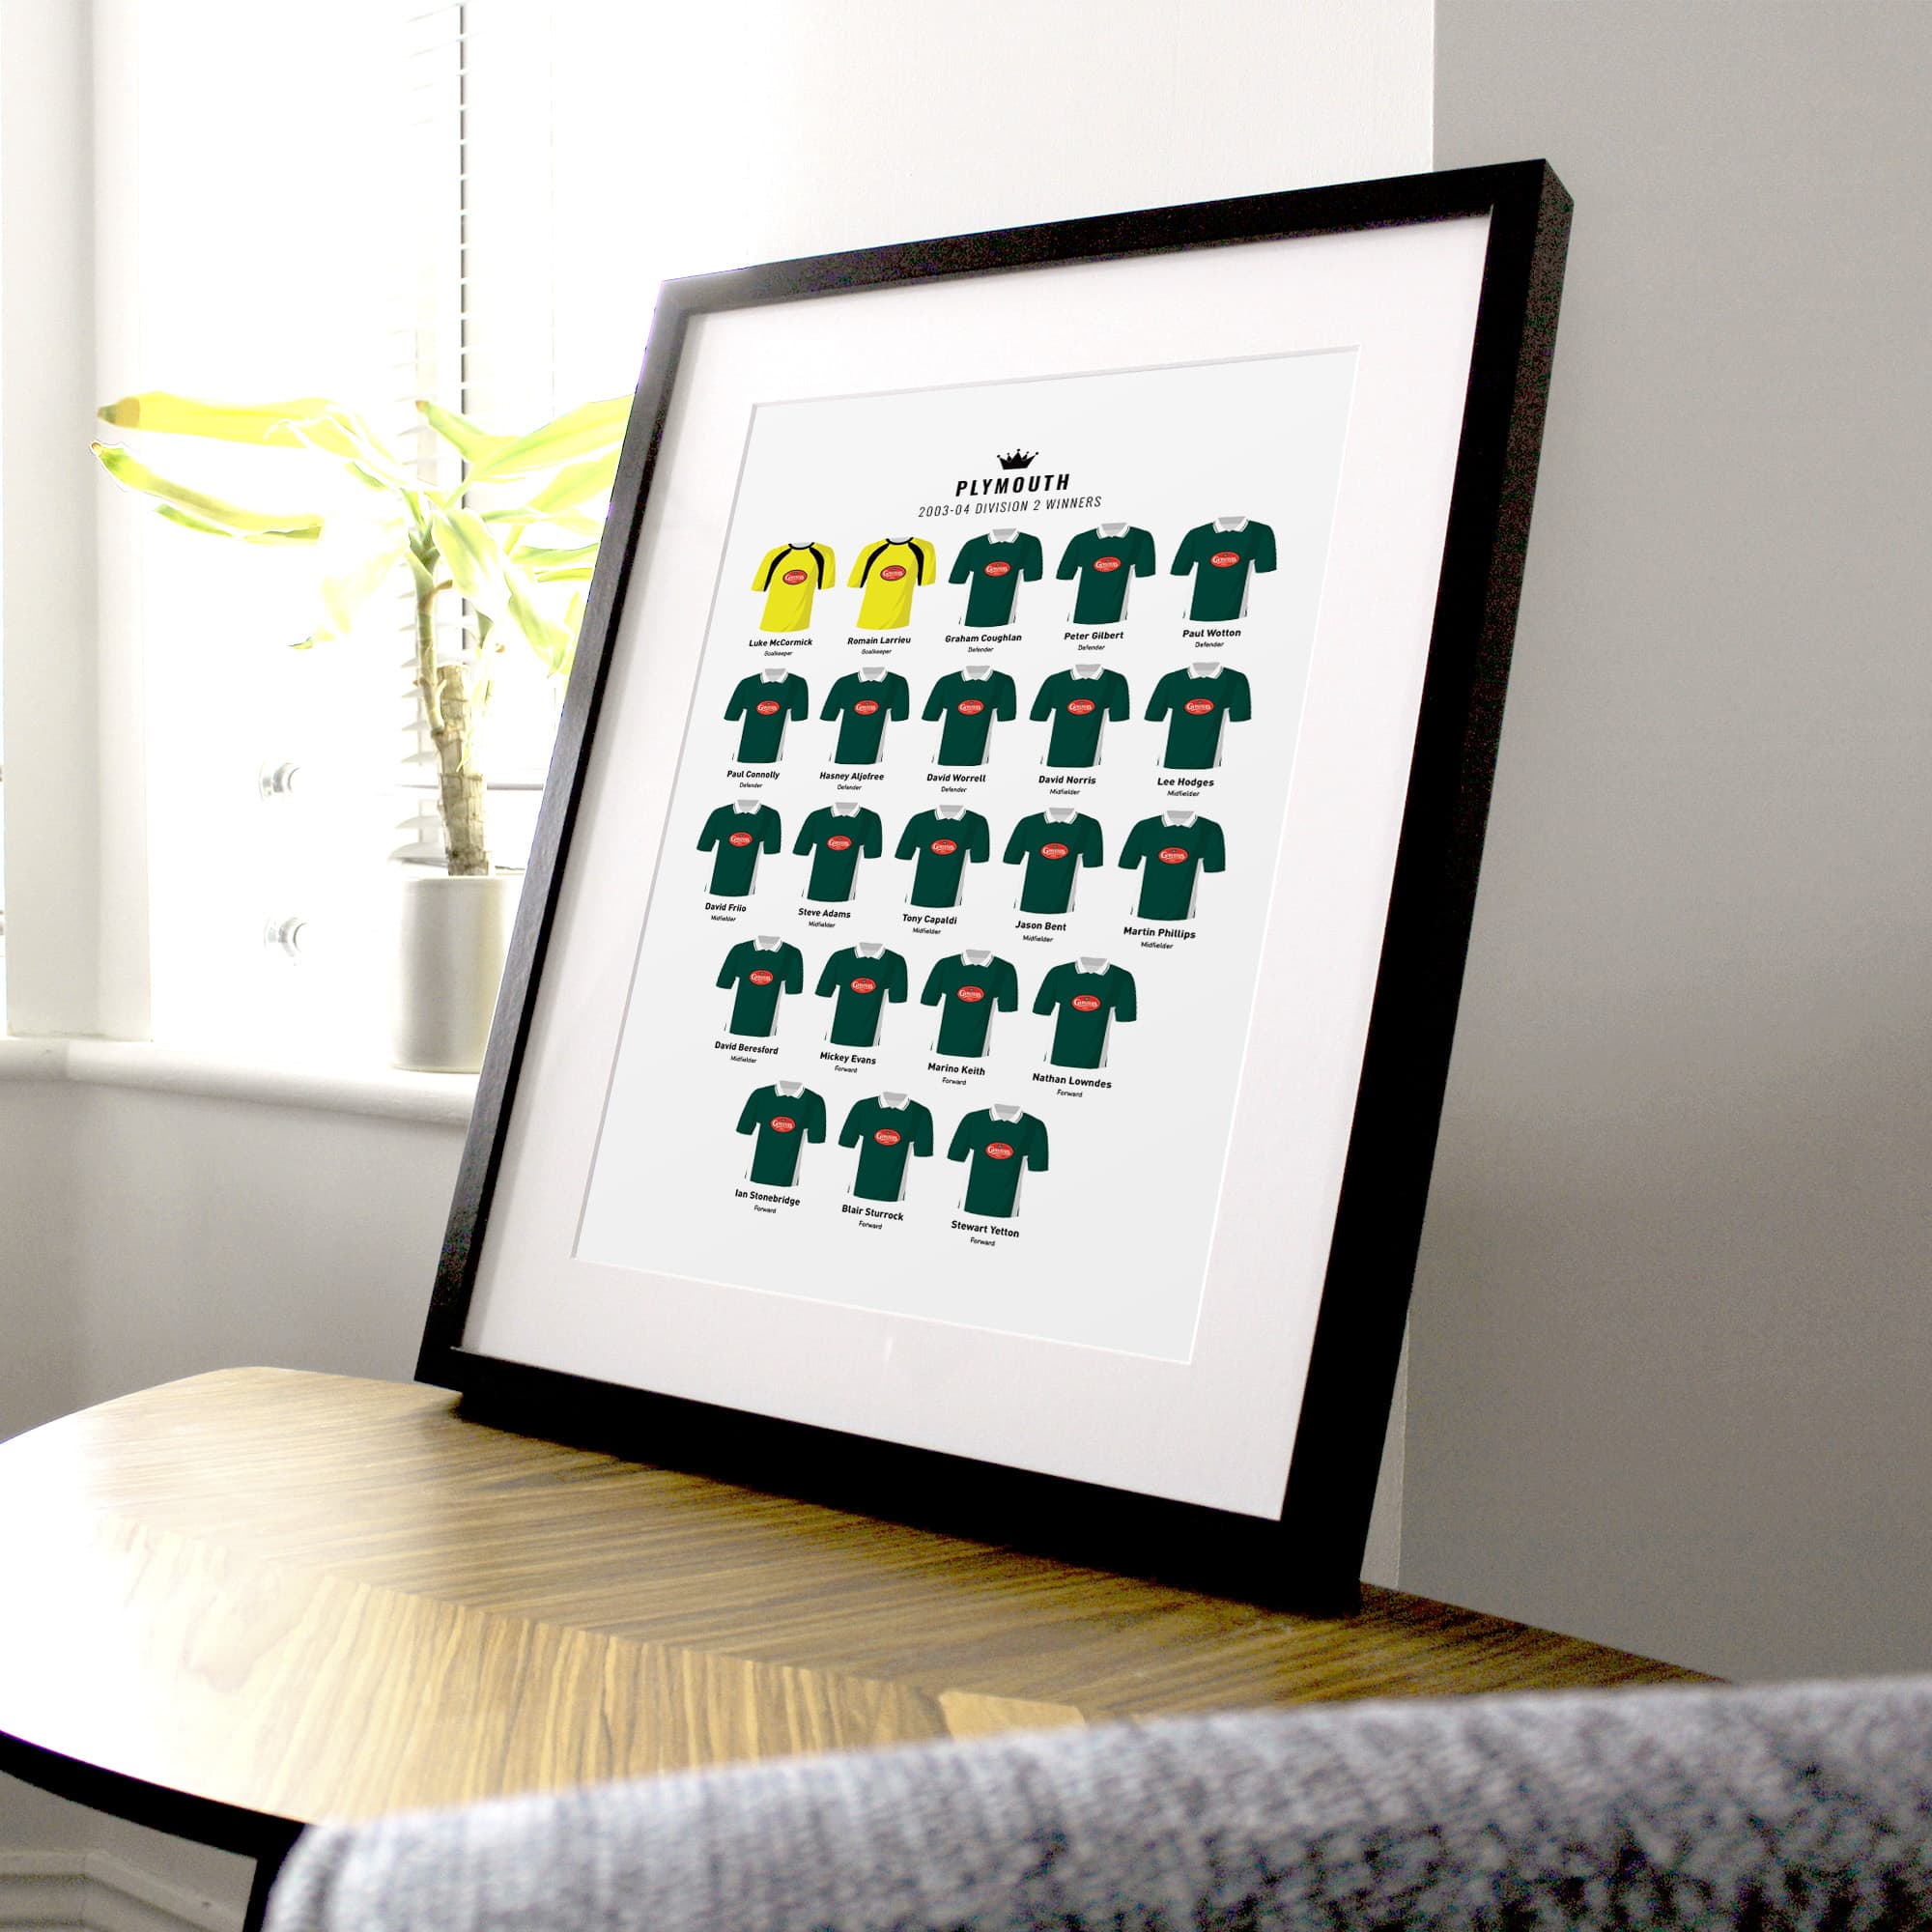 Plymouth 2004 Division 2 Winners Football Team Print Good Team On Paper